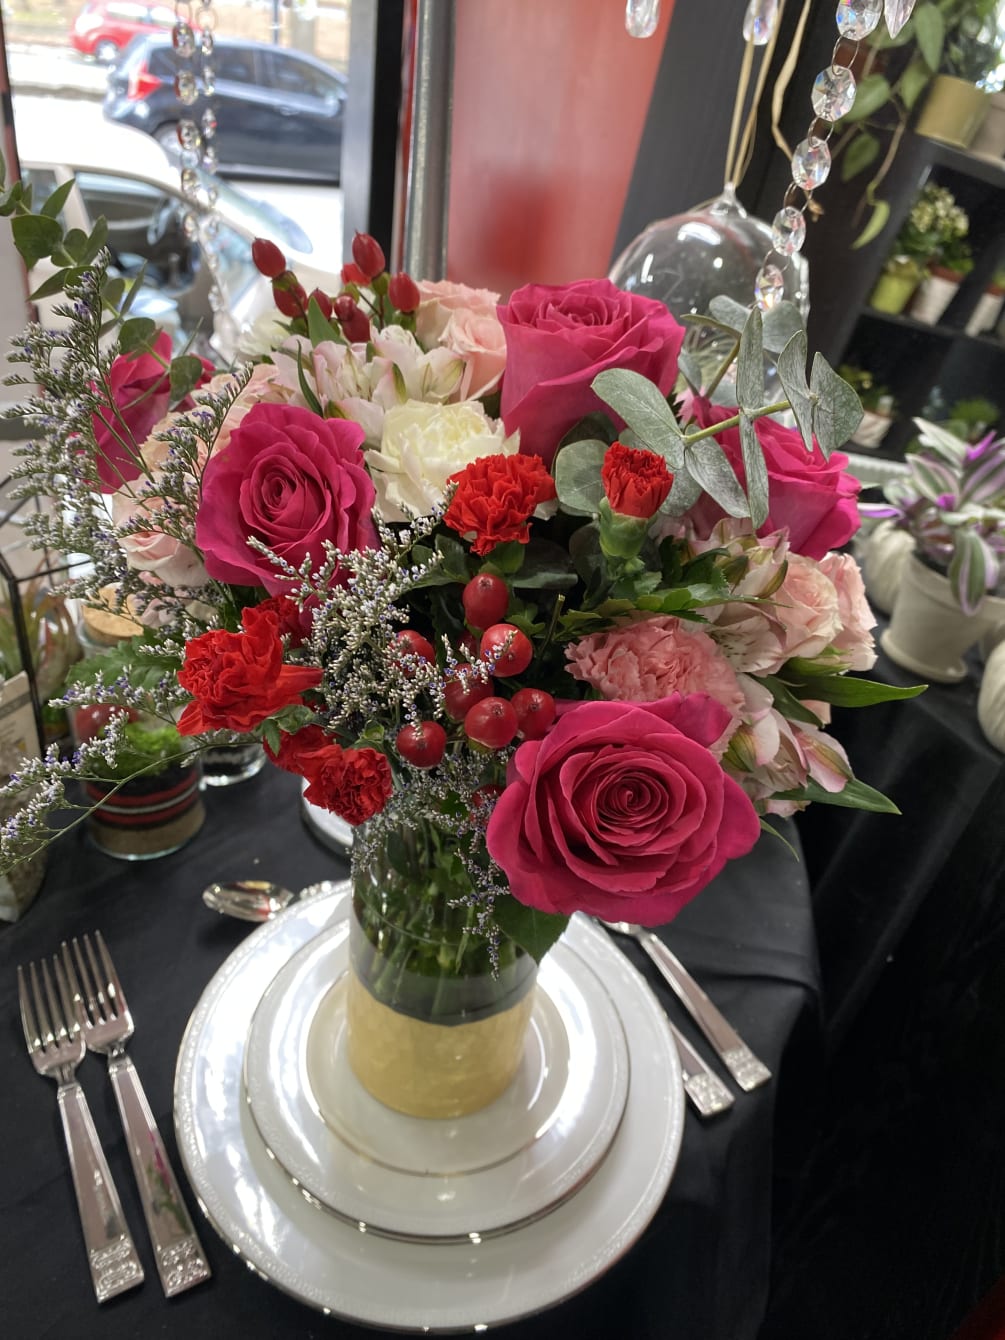 The perfect mixture of roses and delicate white and pink carnations. The